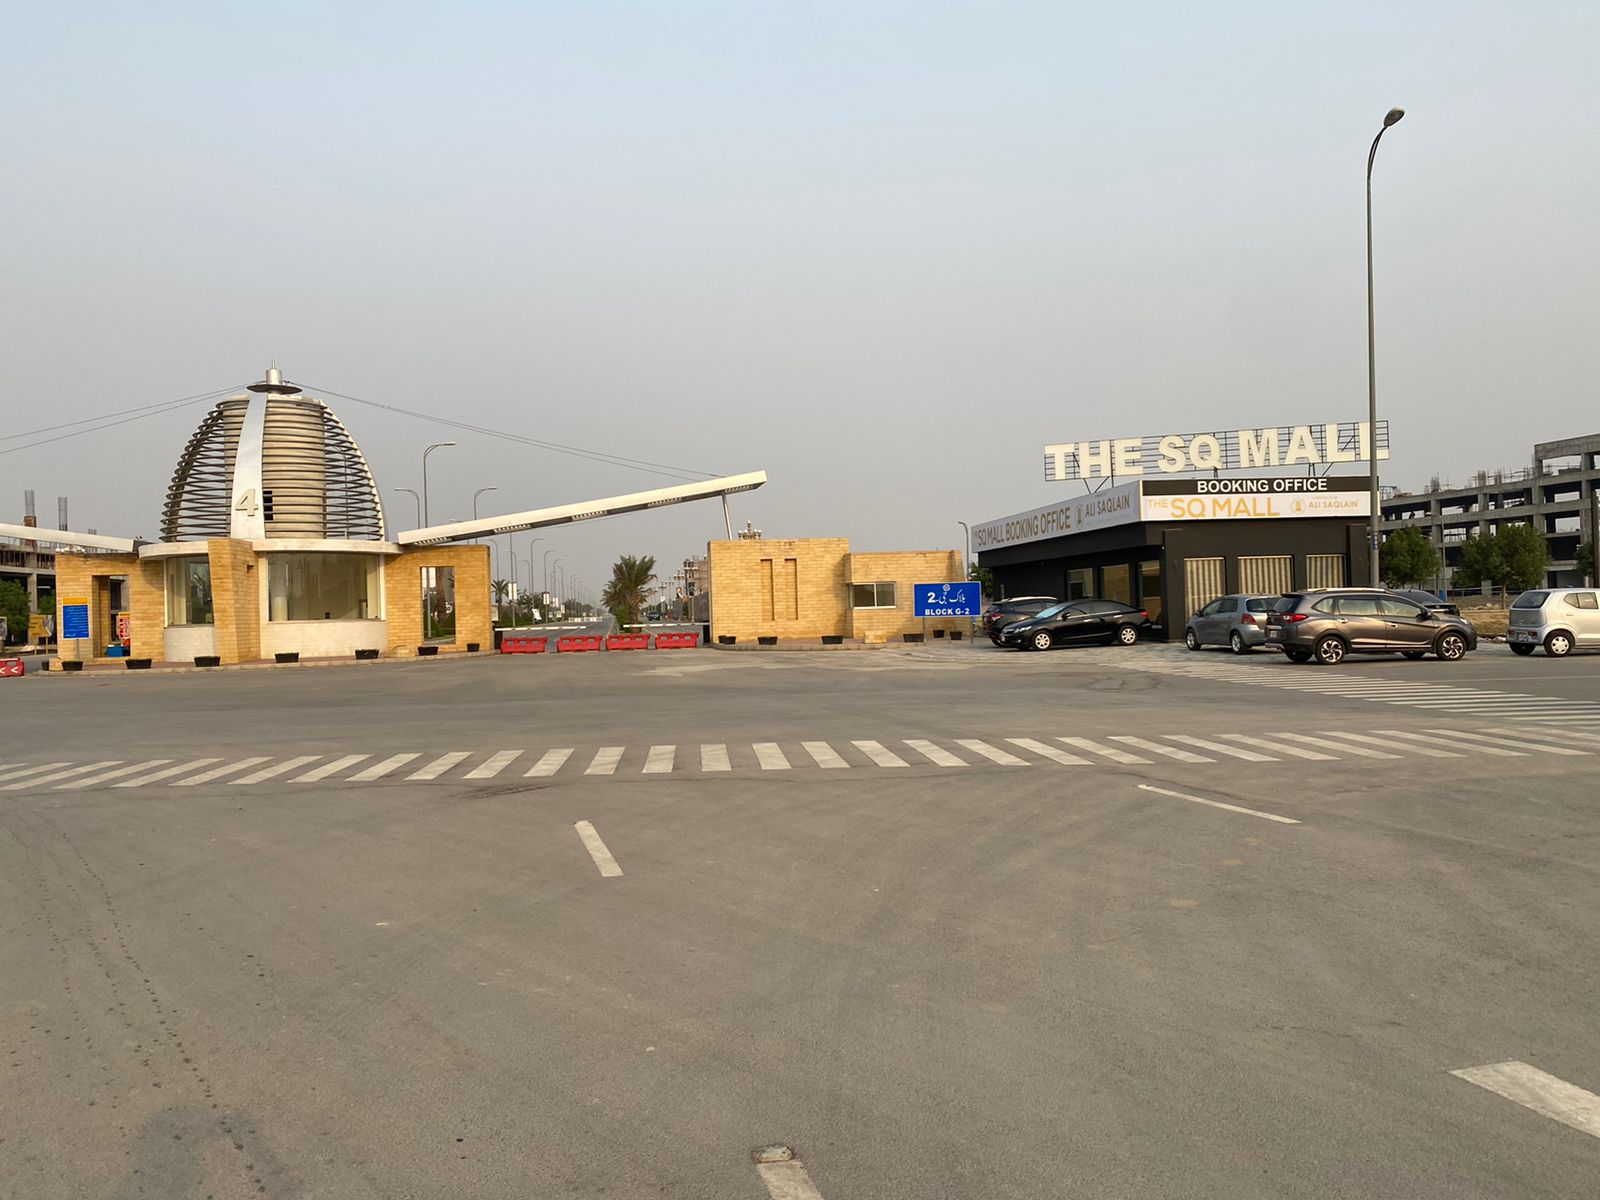 The SQ Mall